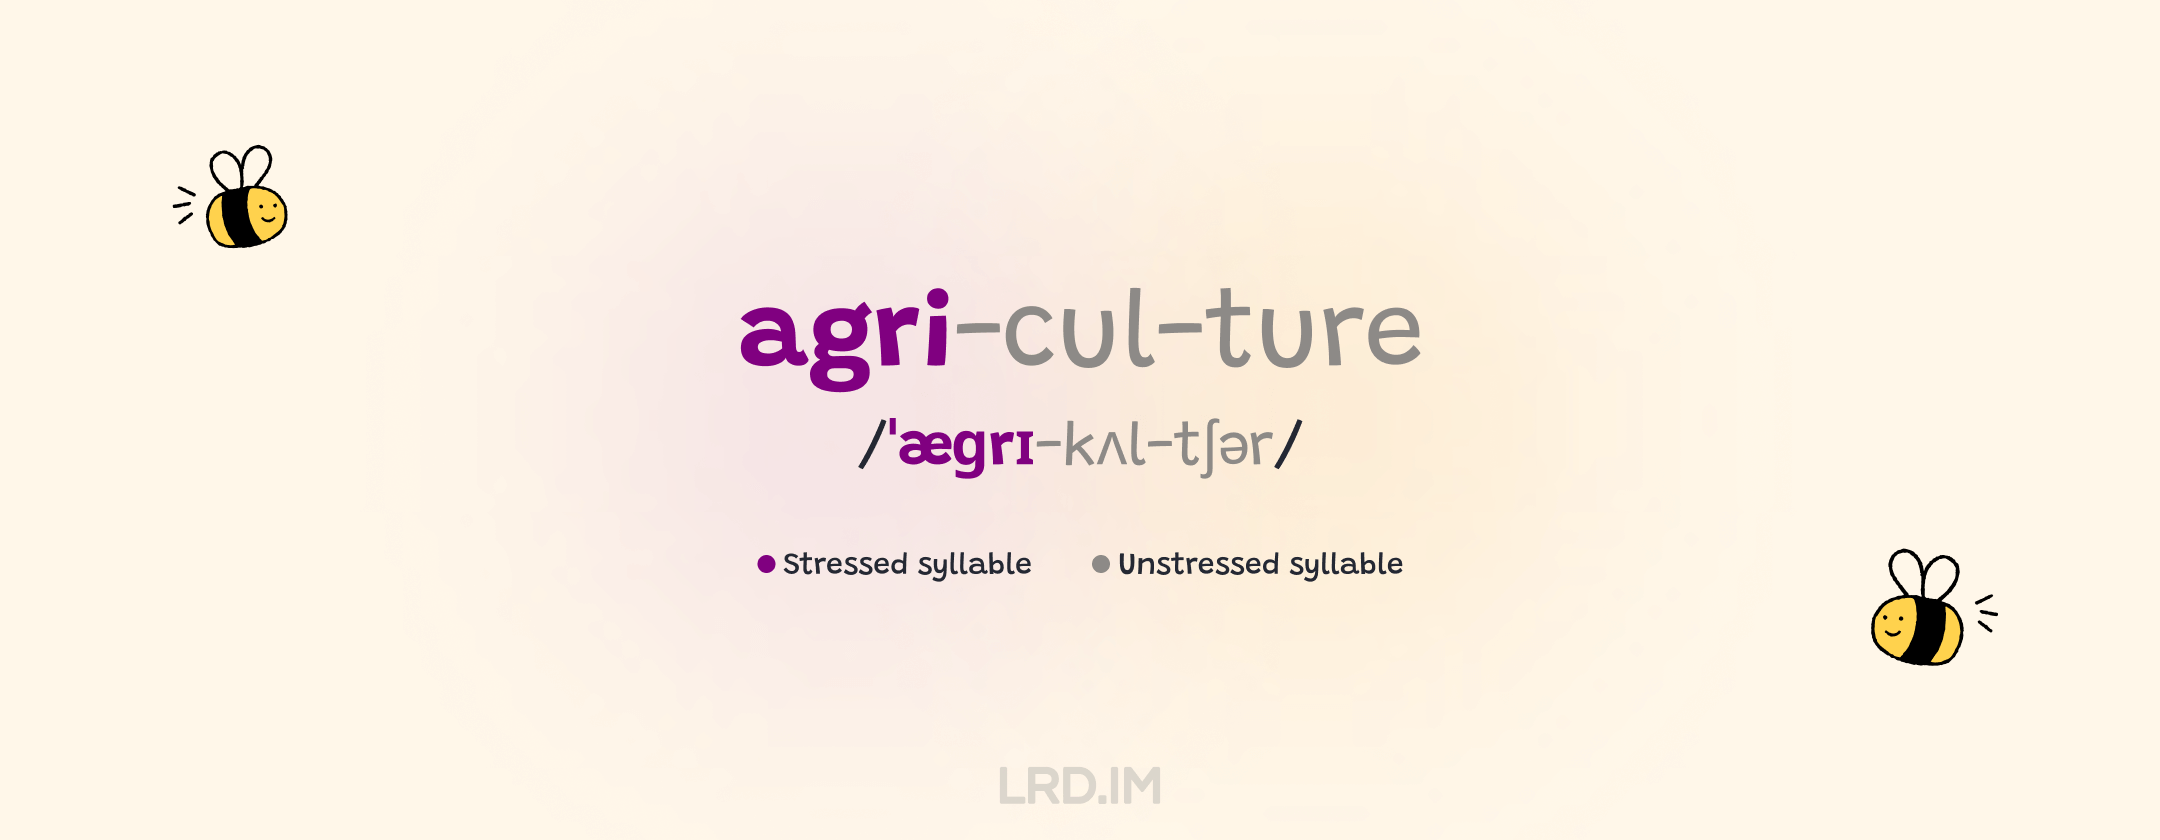 Stressed syllable and unstressed syllables of the word "agriculture"